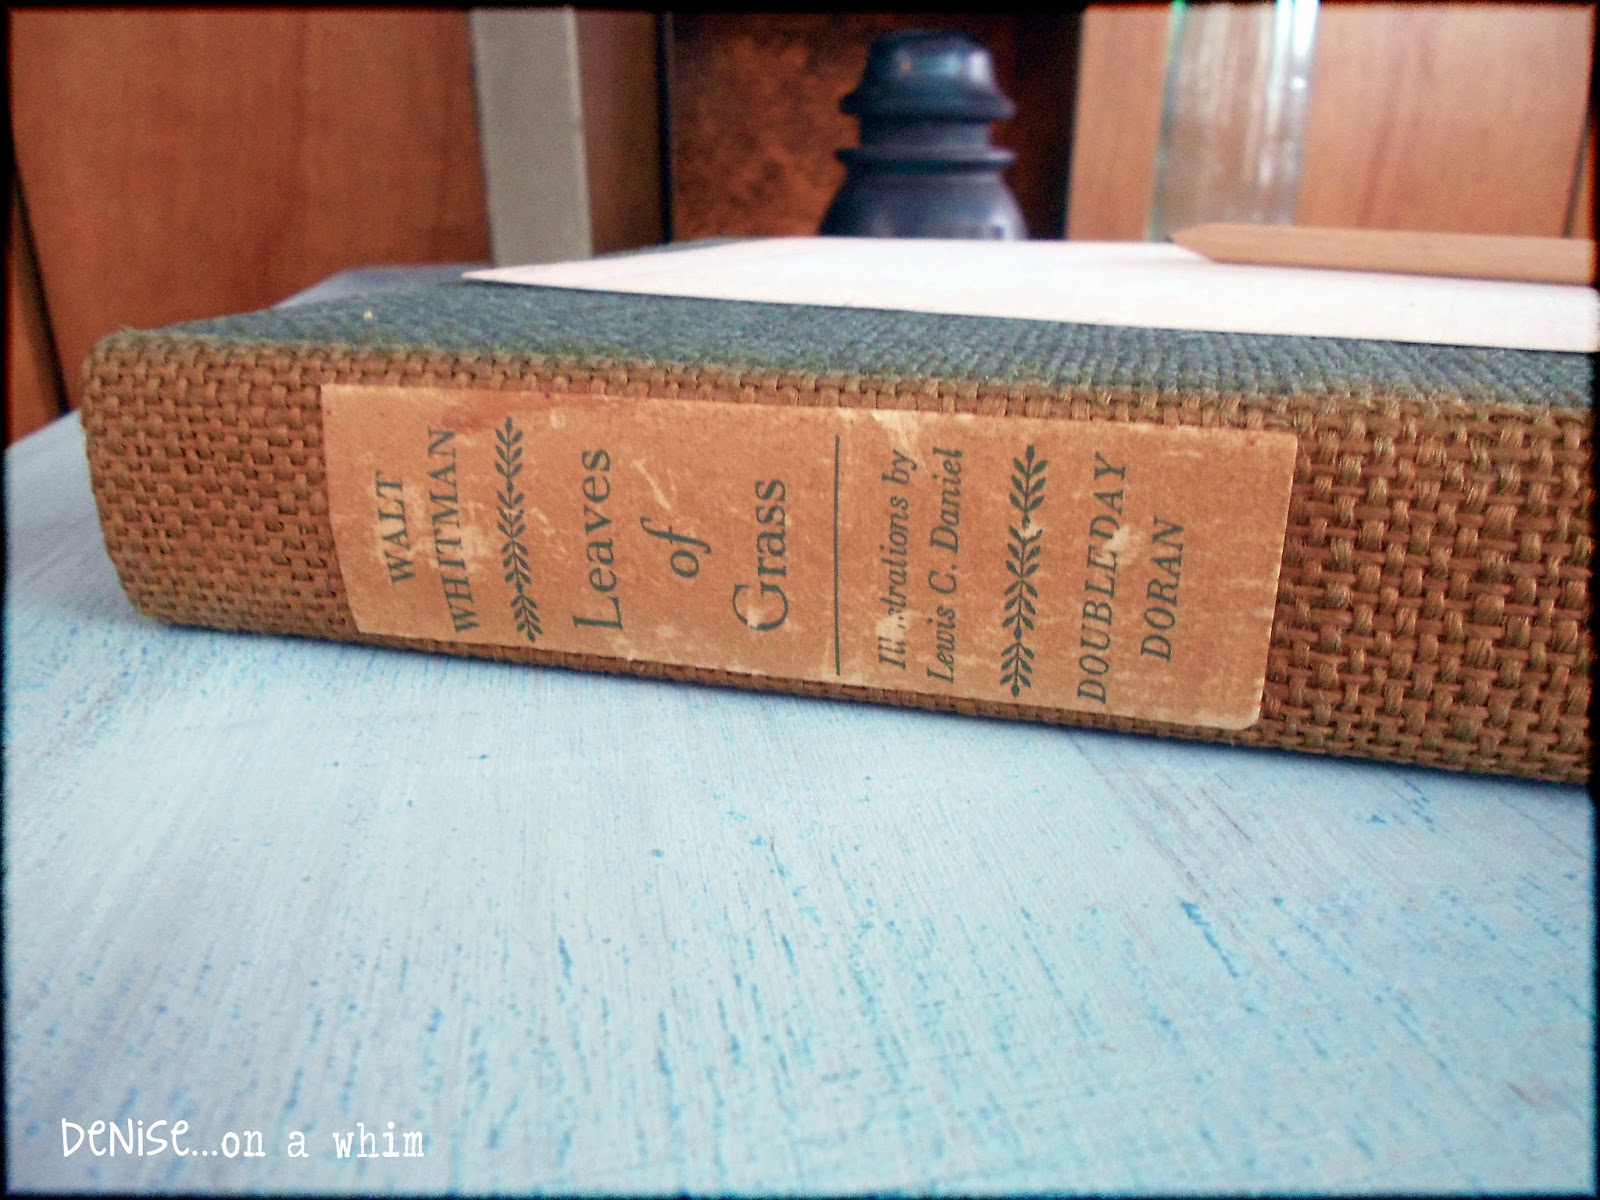 Vintage copy of Leaves of Grass with sun-faded binding via http://deniseonawhim.blogspot.com